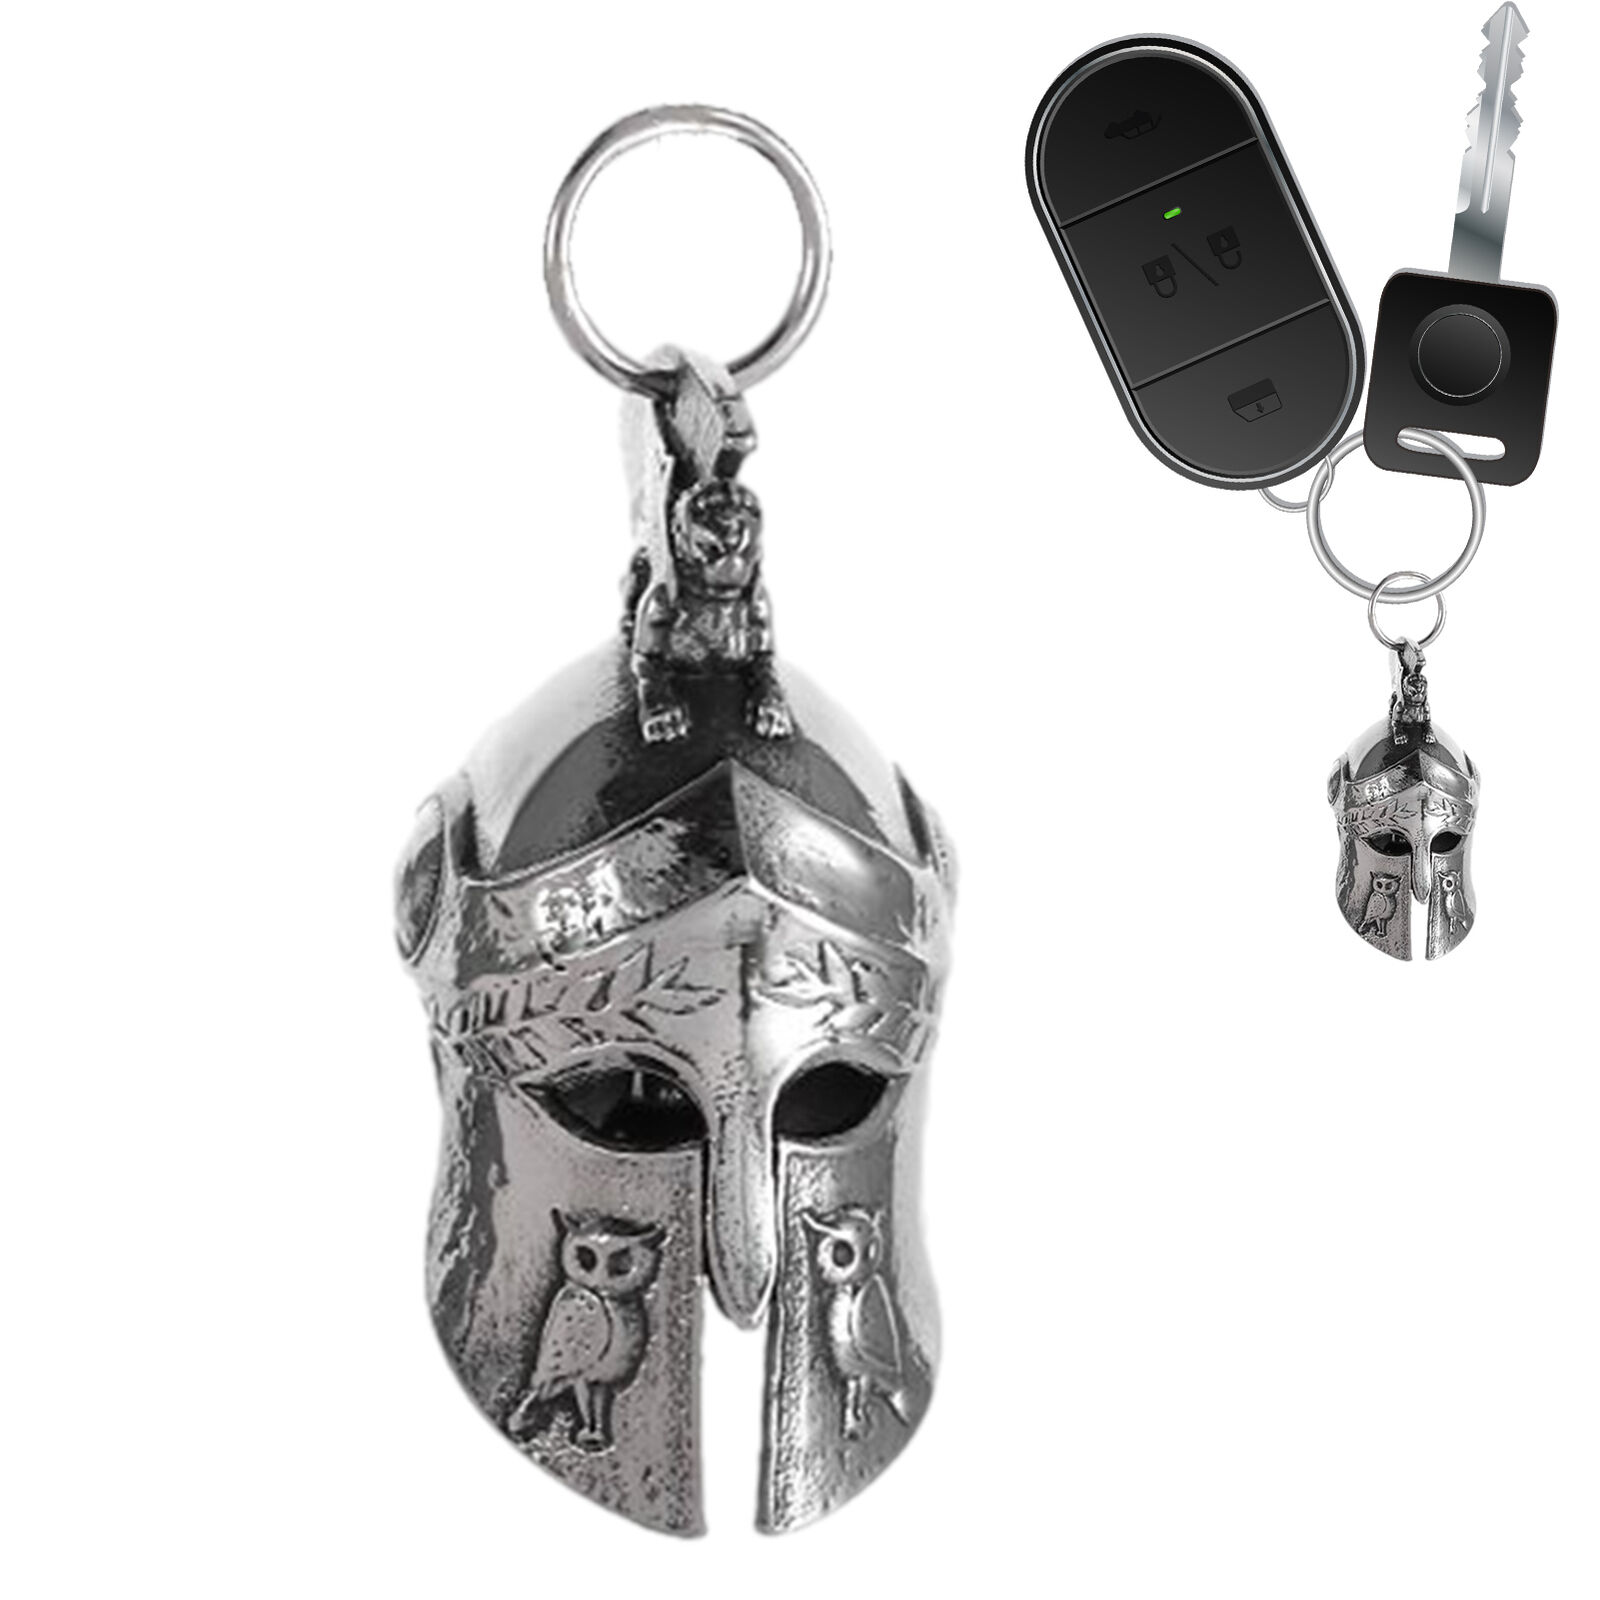 Motorcycle Bells Guardian Titanium Steel Good Luck Keychain Driving Safety Bells